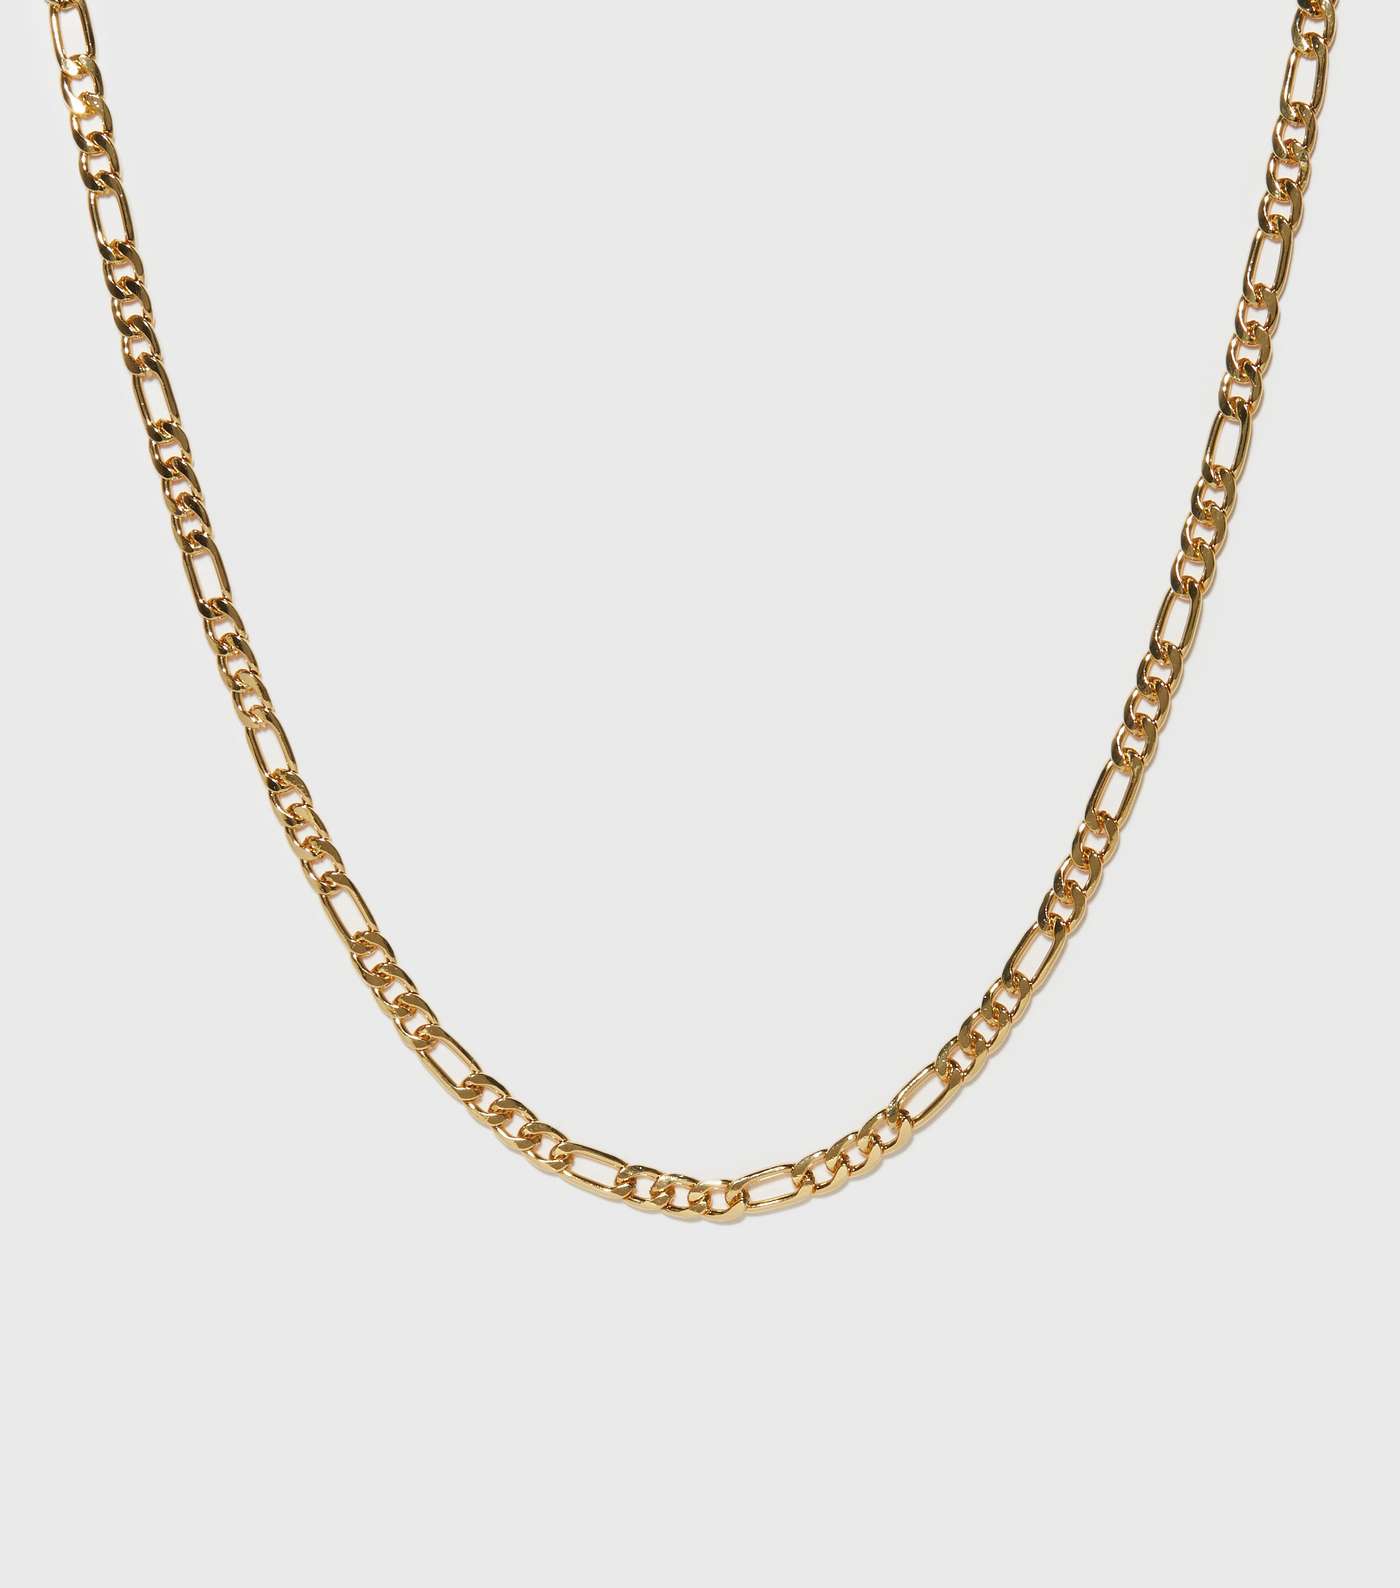 Real Gold Plate Chain Link Necklace